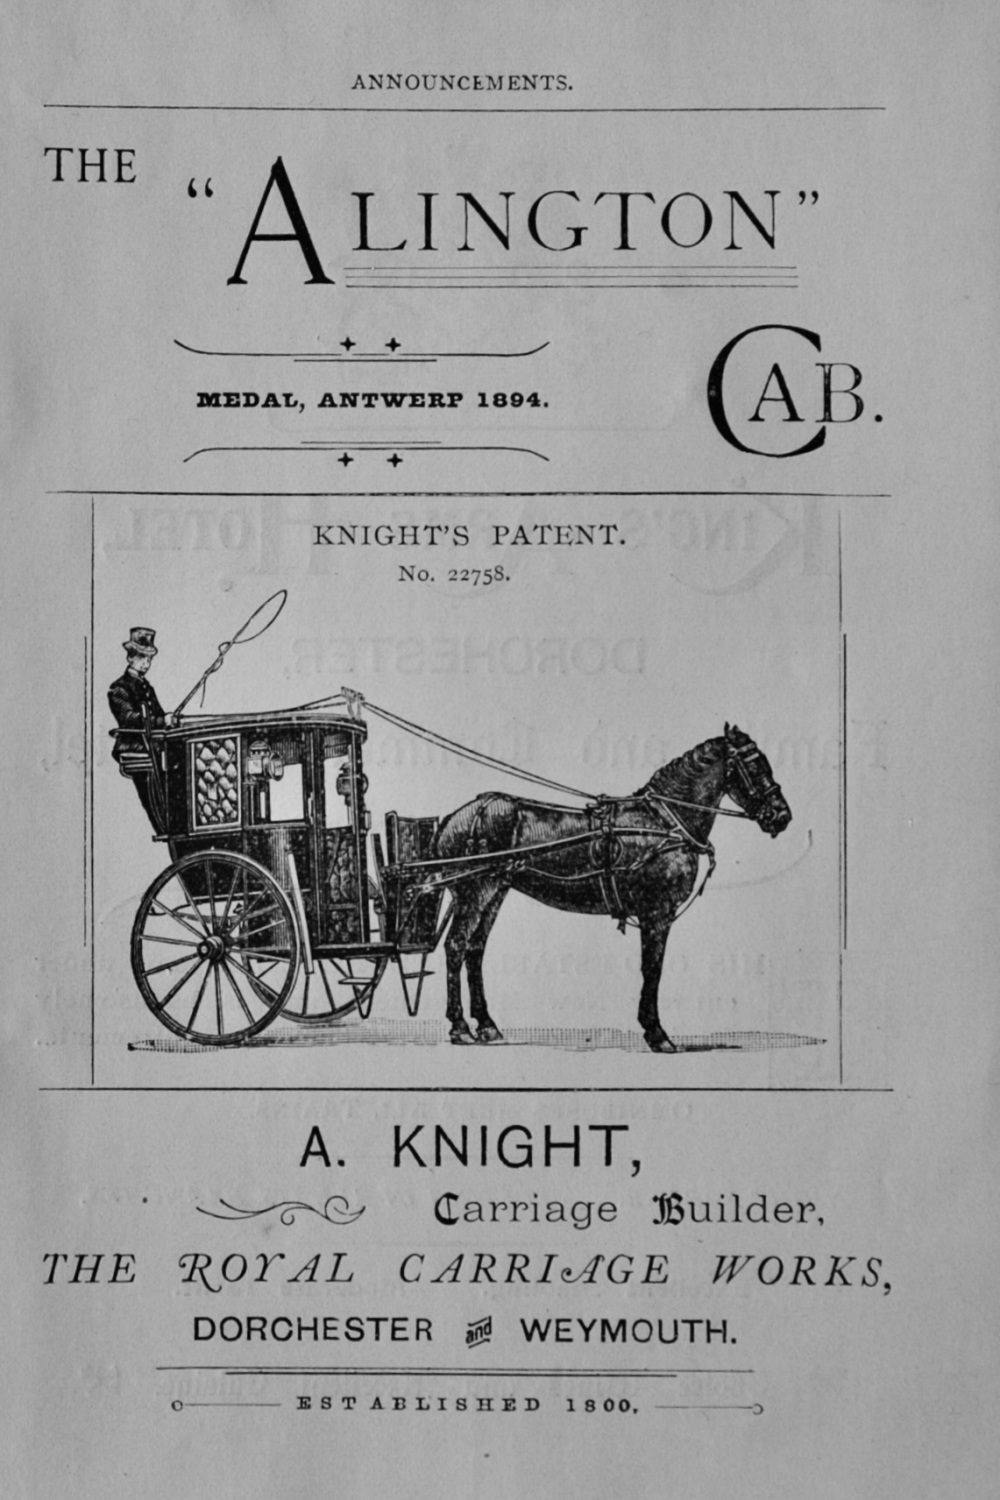 A Knight, Carriage Builder, The Royal Carriage Works, Dorchester and Weymou